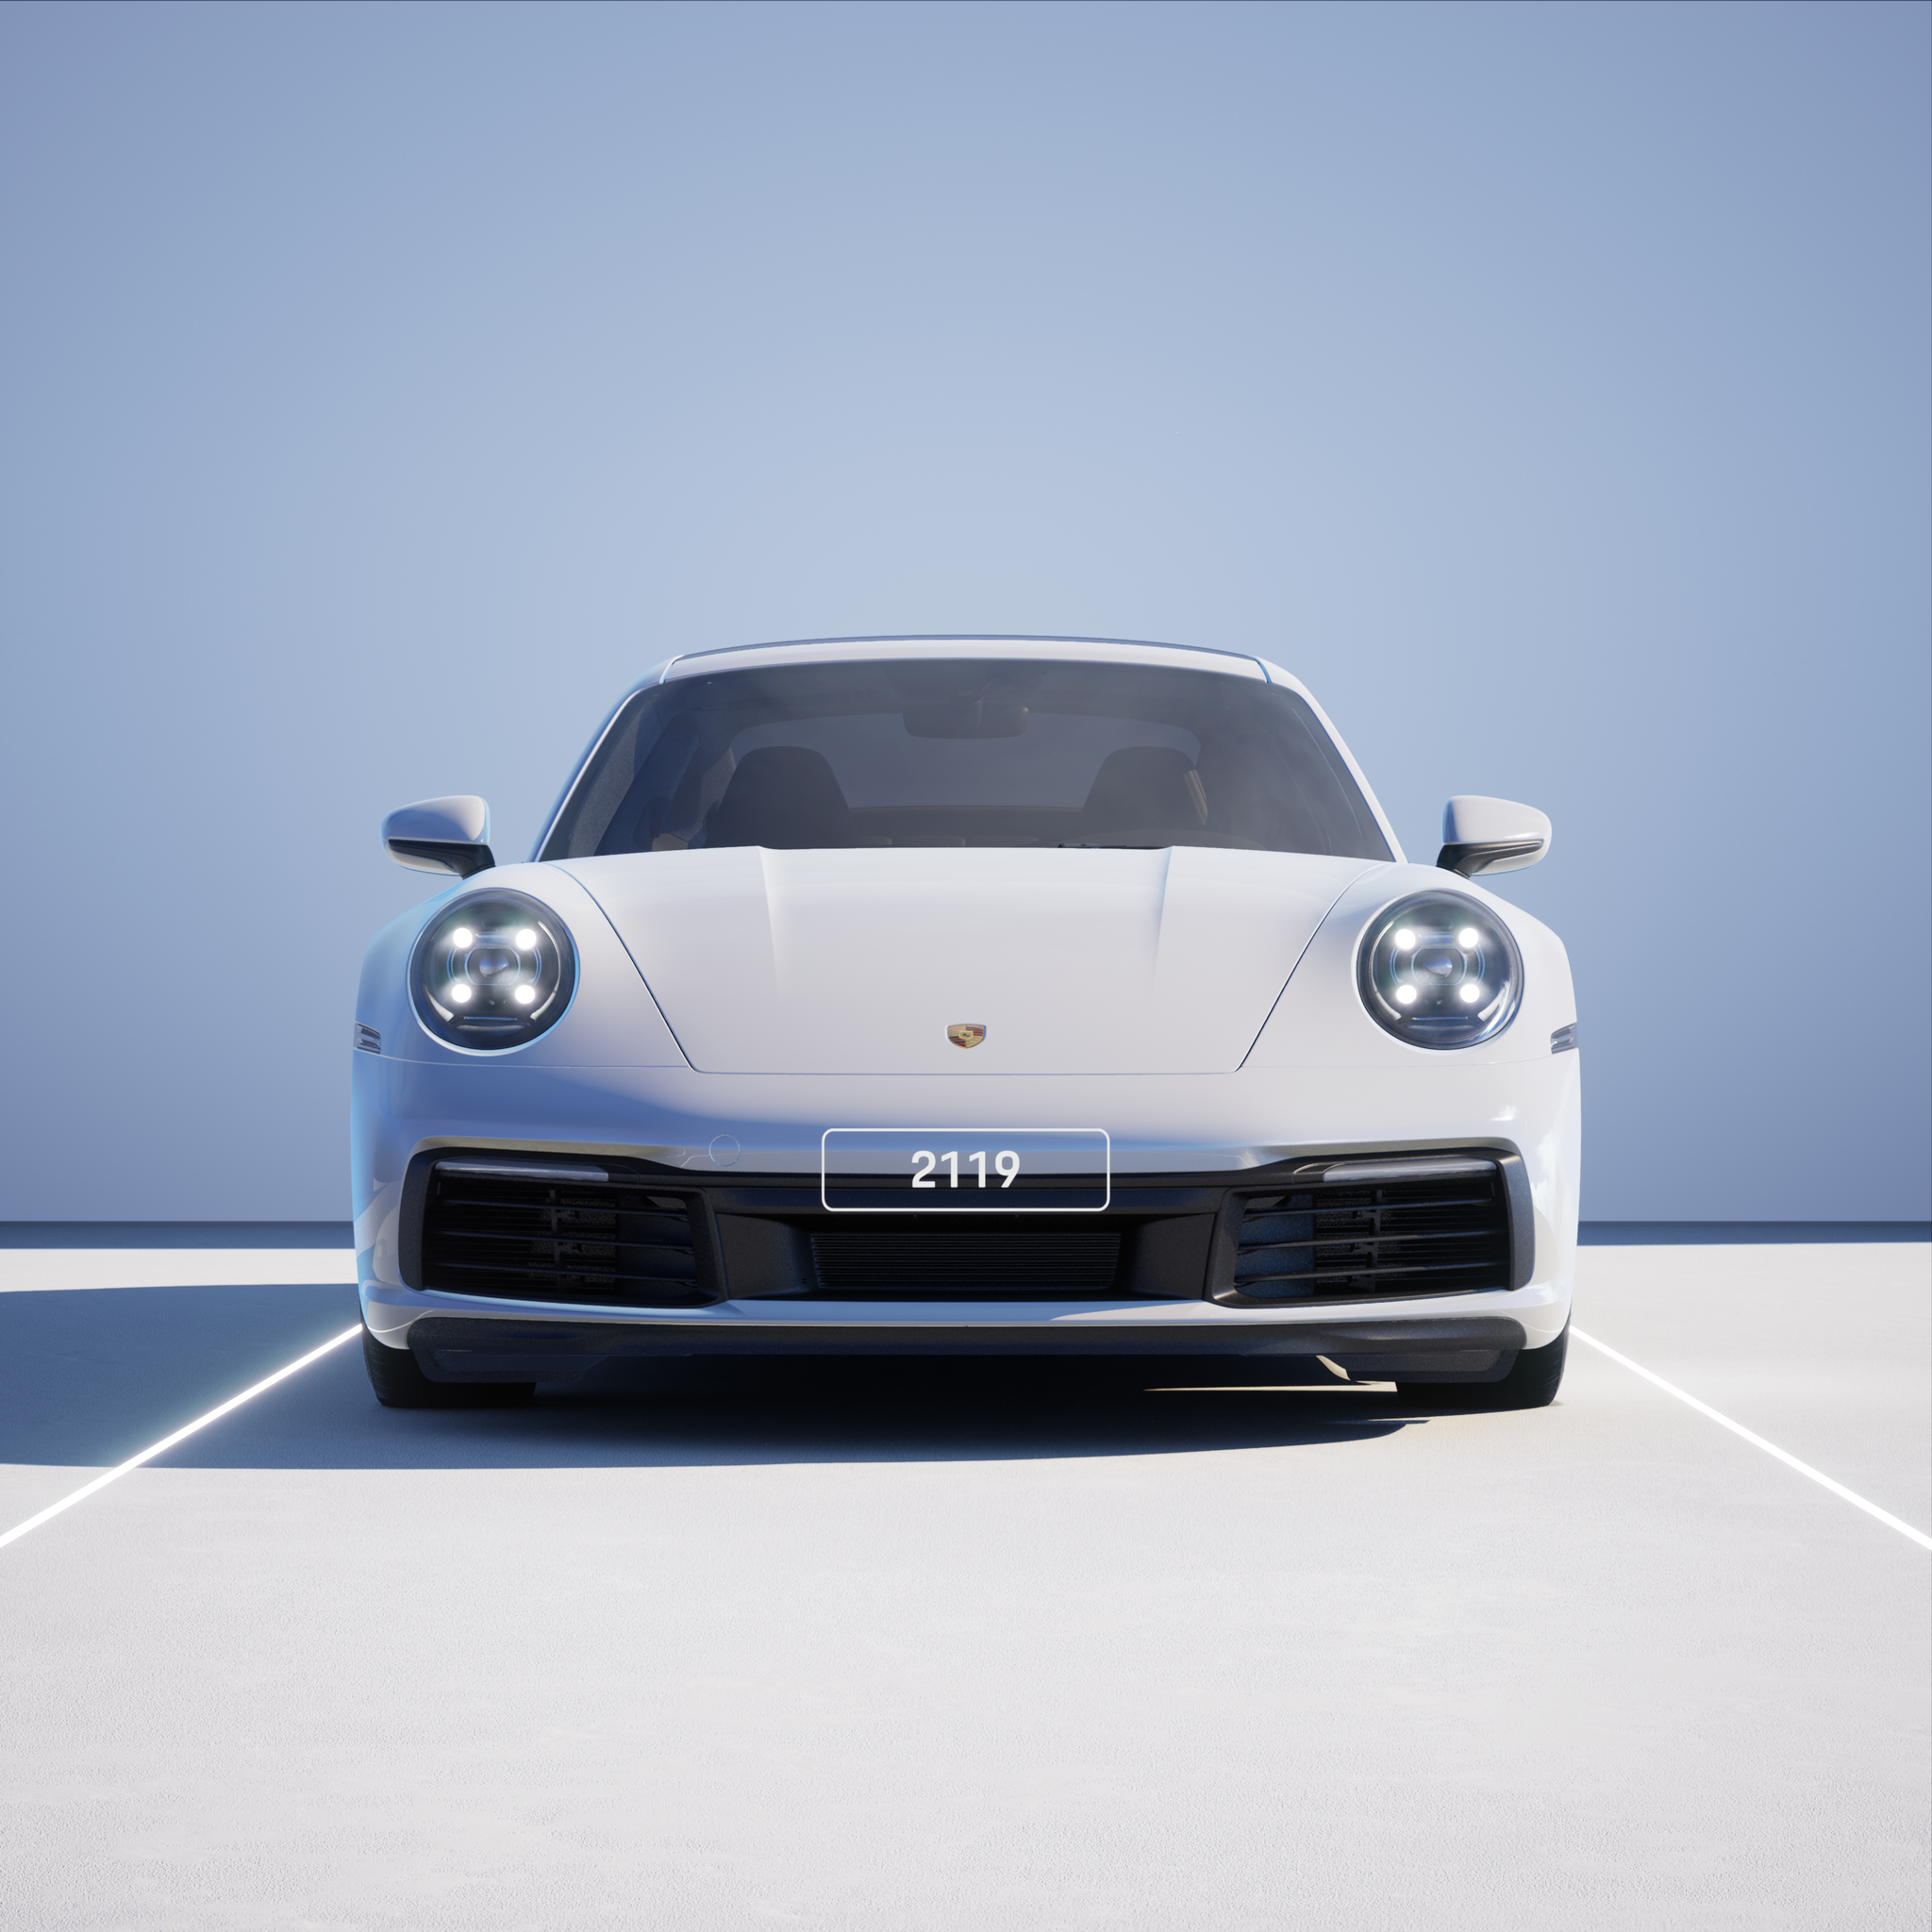 The PORSCHΞ 911 2119 image in phase